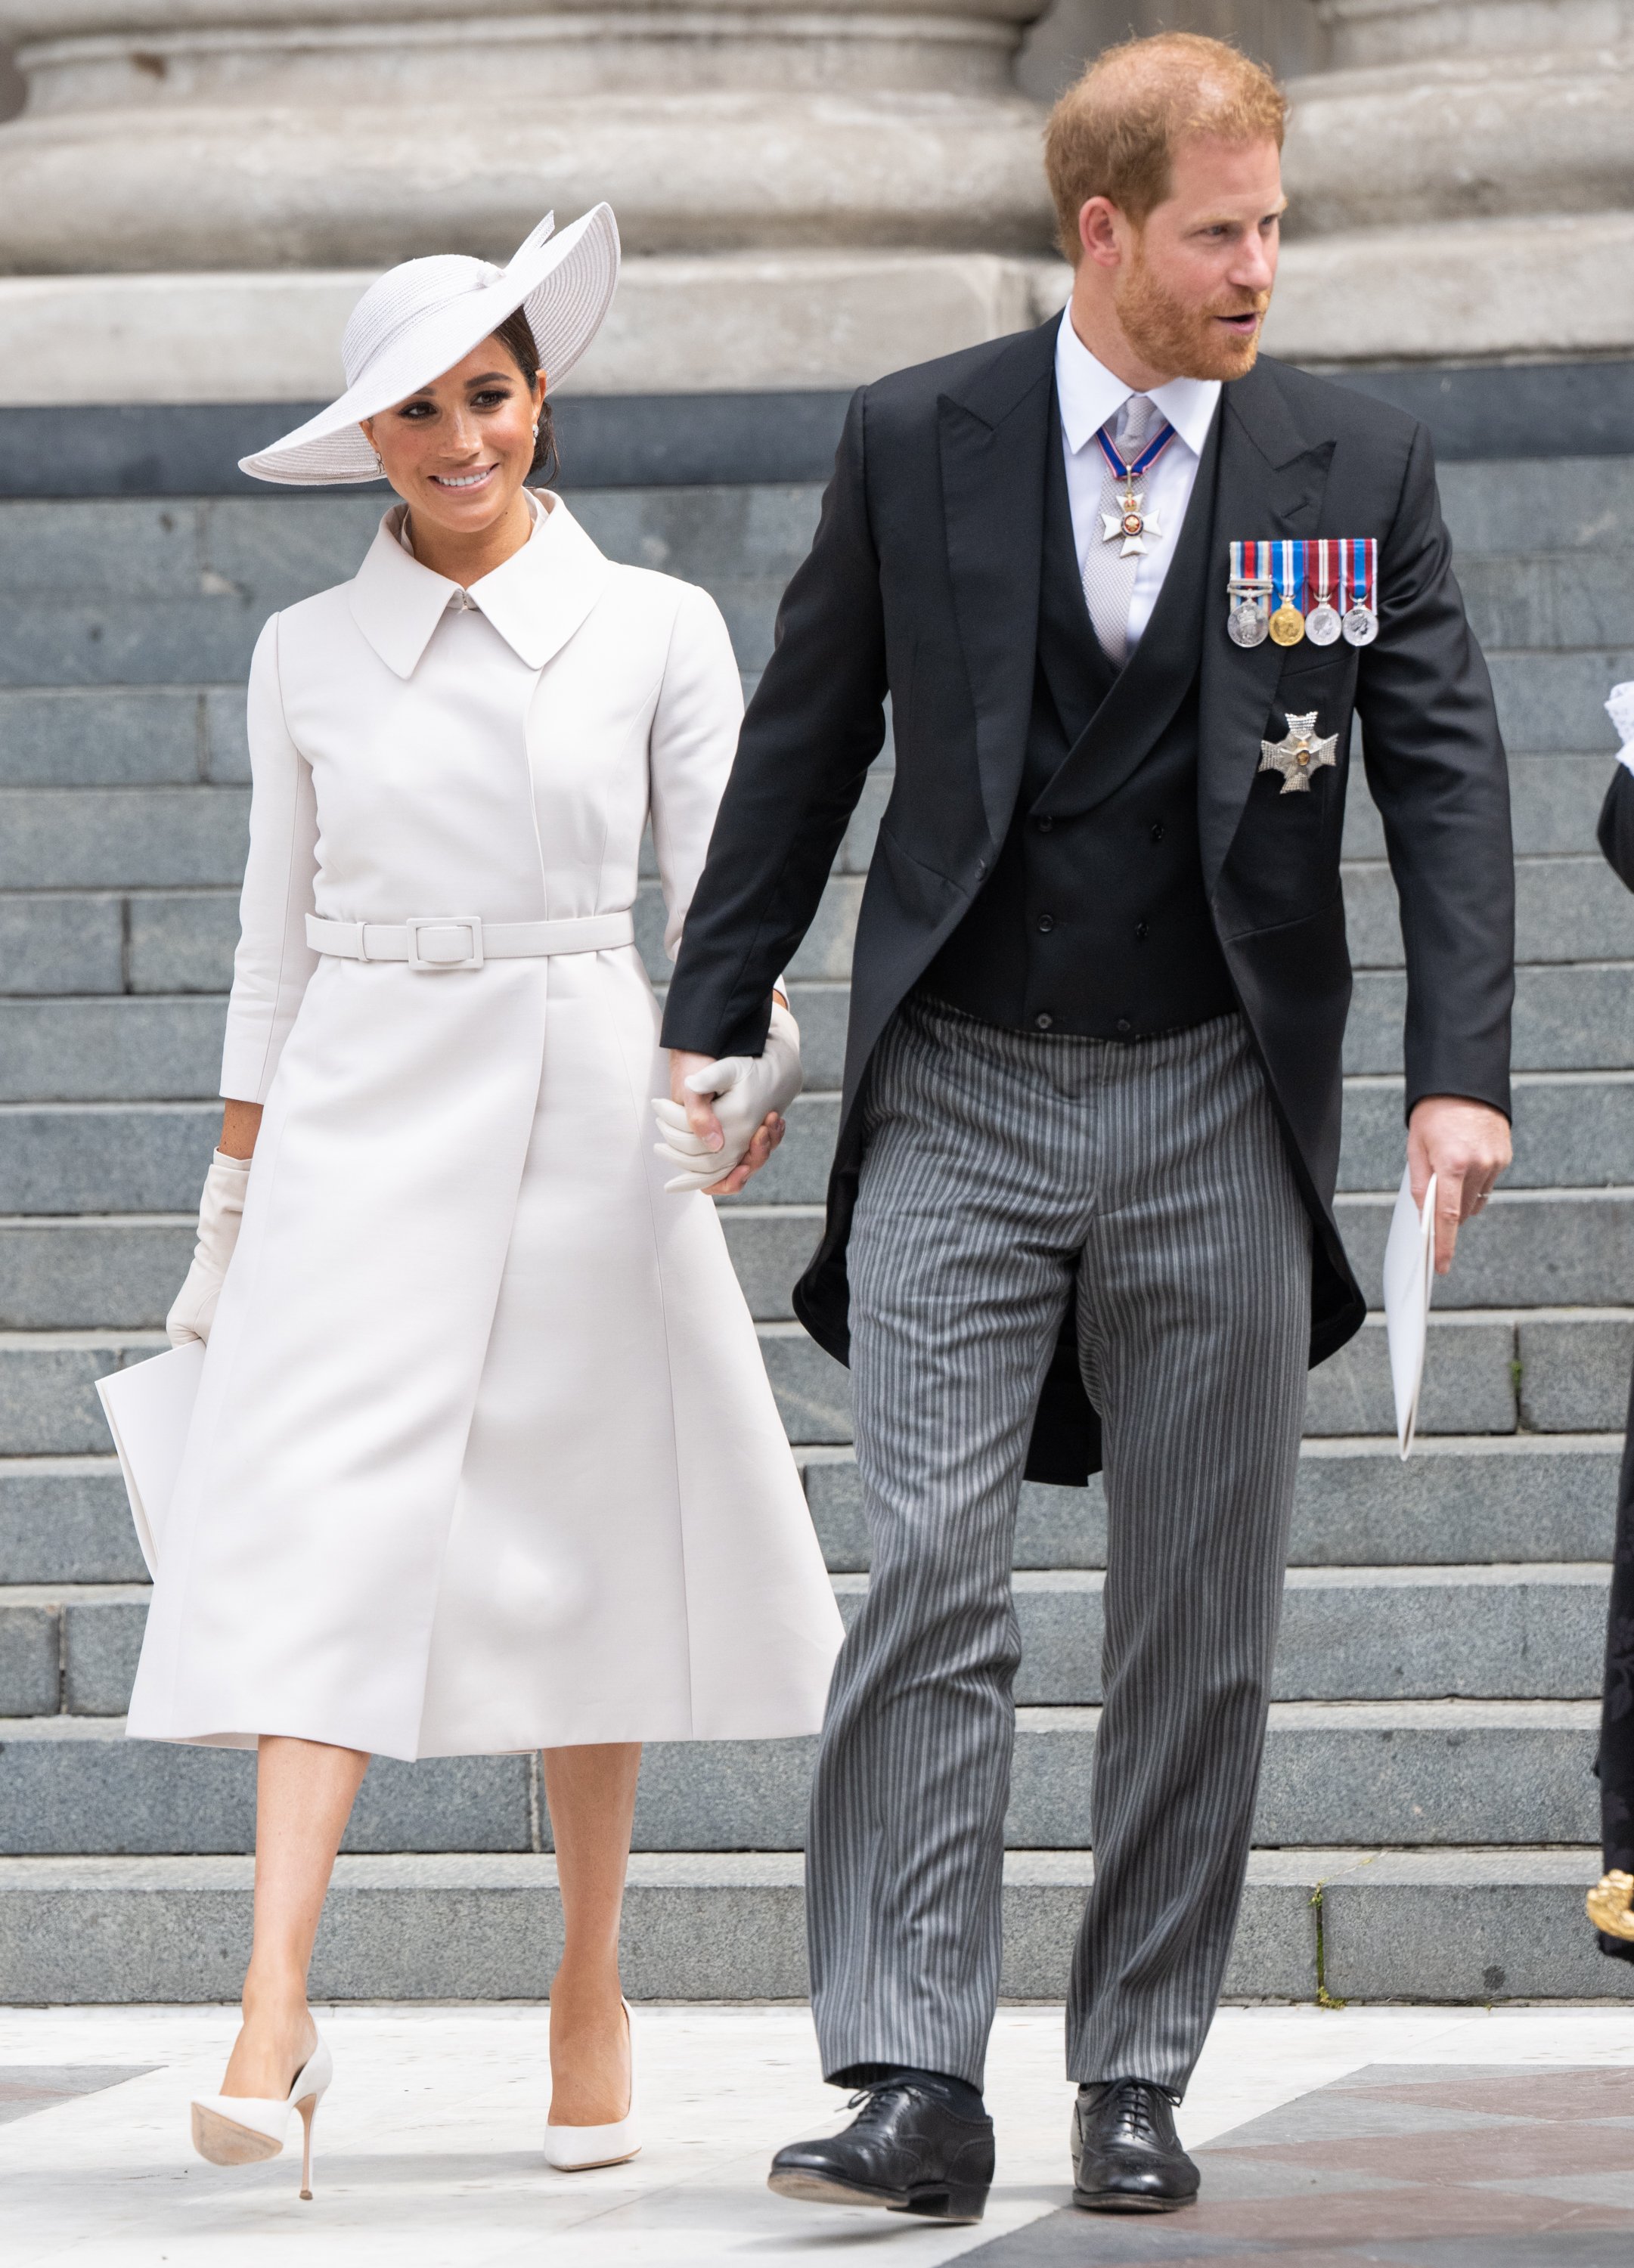  Meghan, Duchess of Sussex and Prince Harry, Duke of Sussex attend the National Service of Thanksgiving at St Paul's Cathedral on June 03, 2022 in London, England. | Source: Getty Images